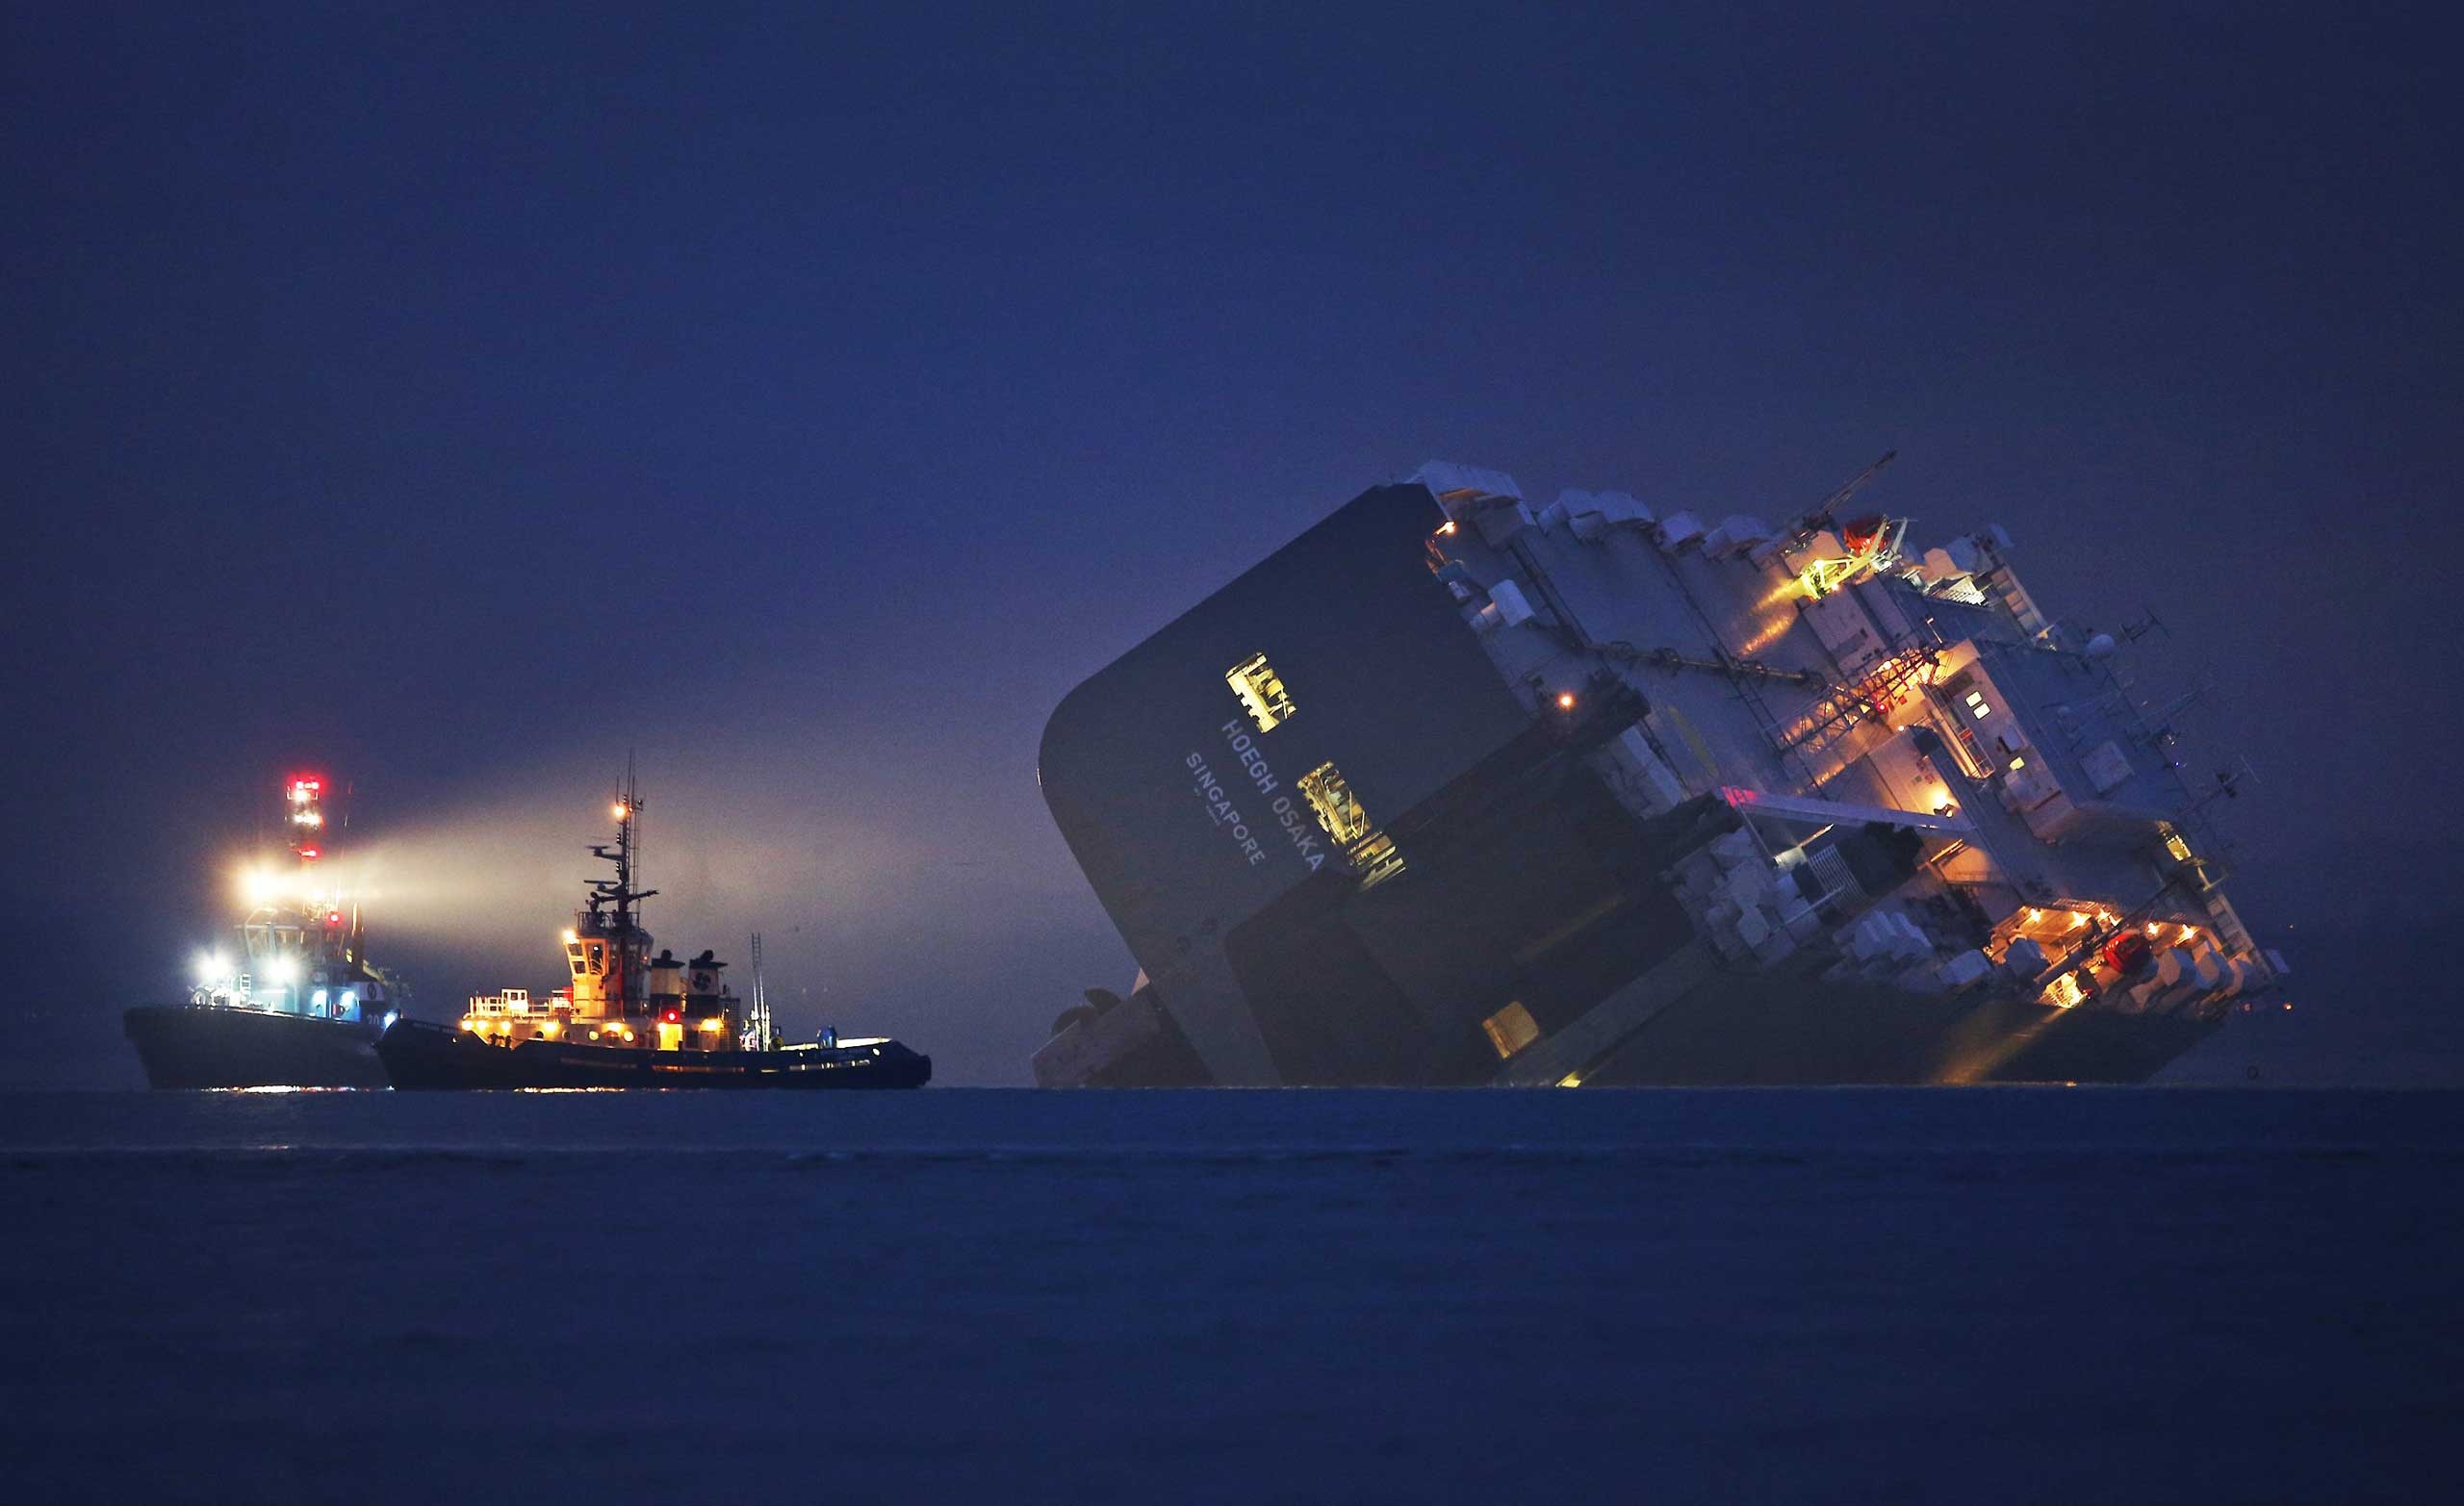 Jan 4. 2015.  A salvage tug lights the hull of the stricken Hoegh Osaka cargo ship after it ran aground on a sand bank  Cowes, England.